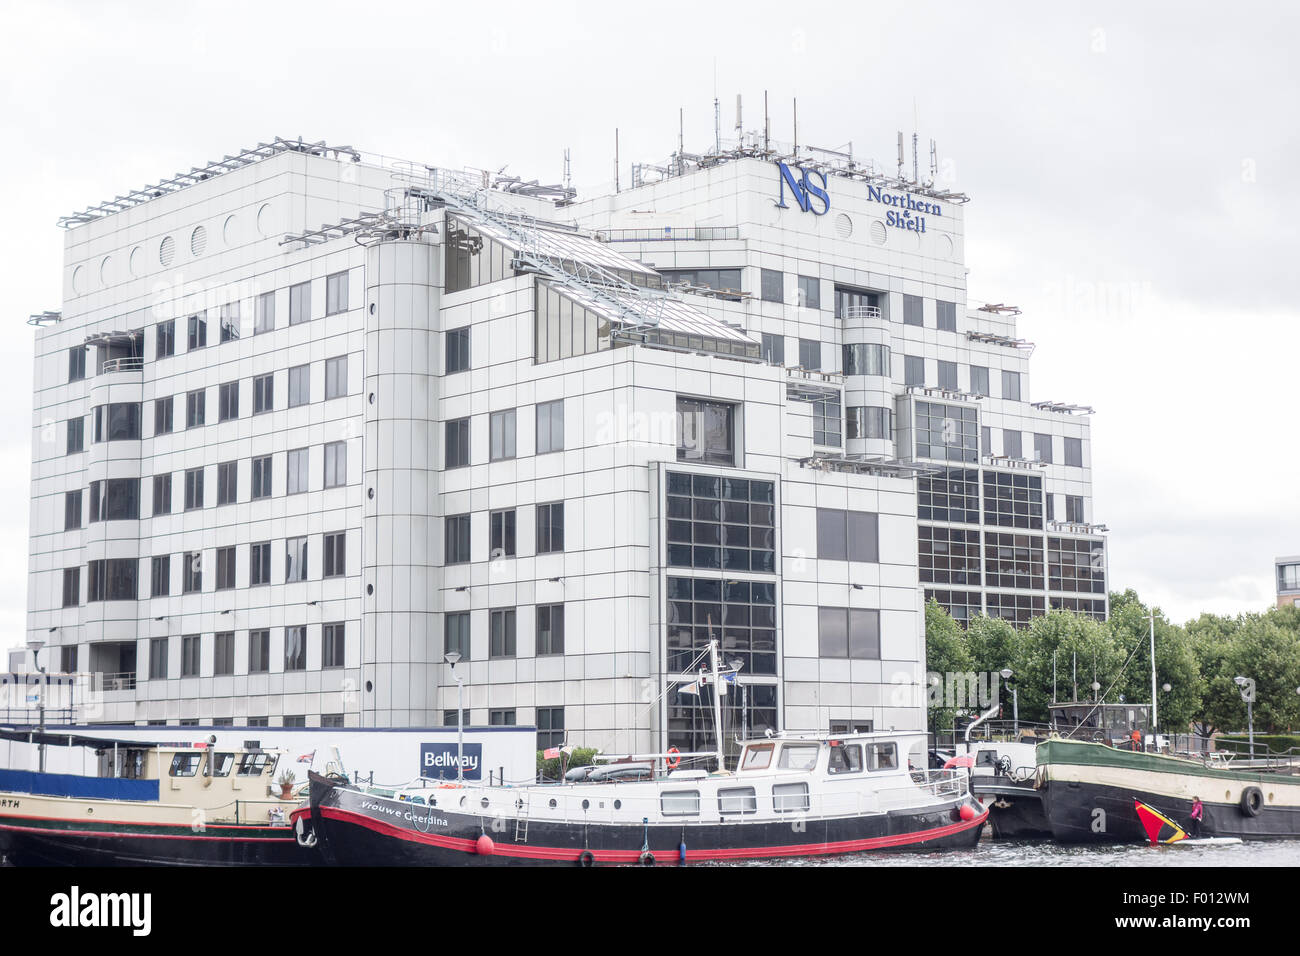 The Northern Shell office in Crossharbour overlooks the dock. Stock Photo